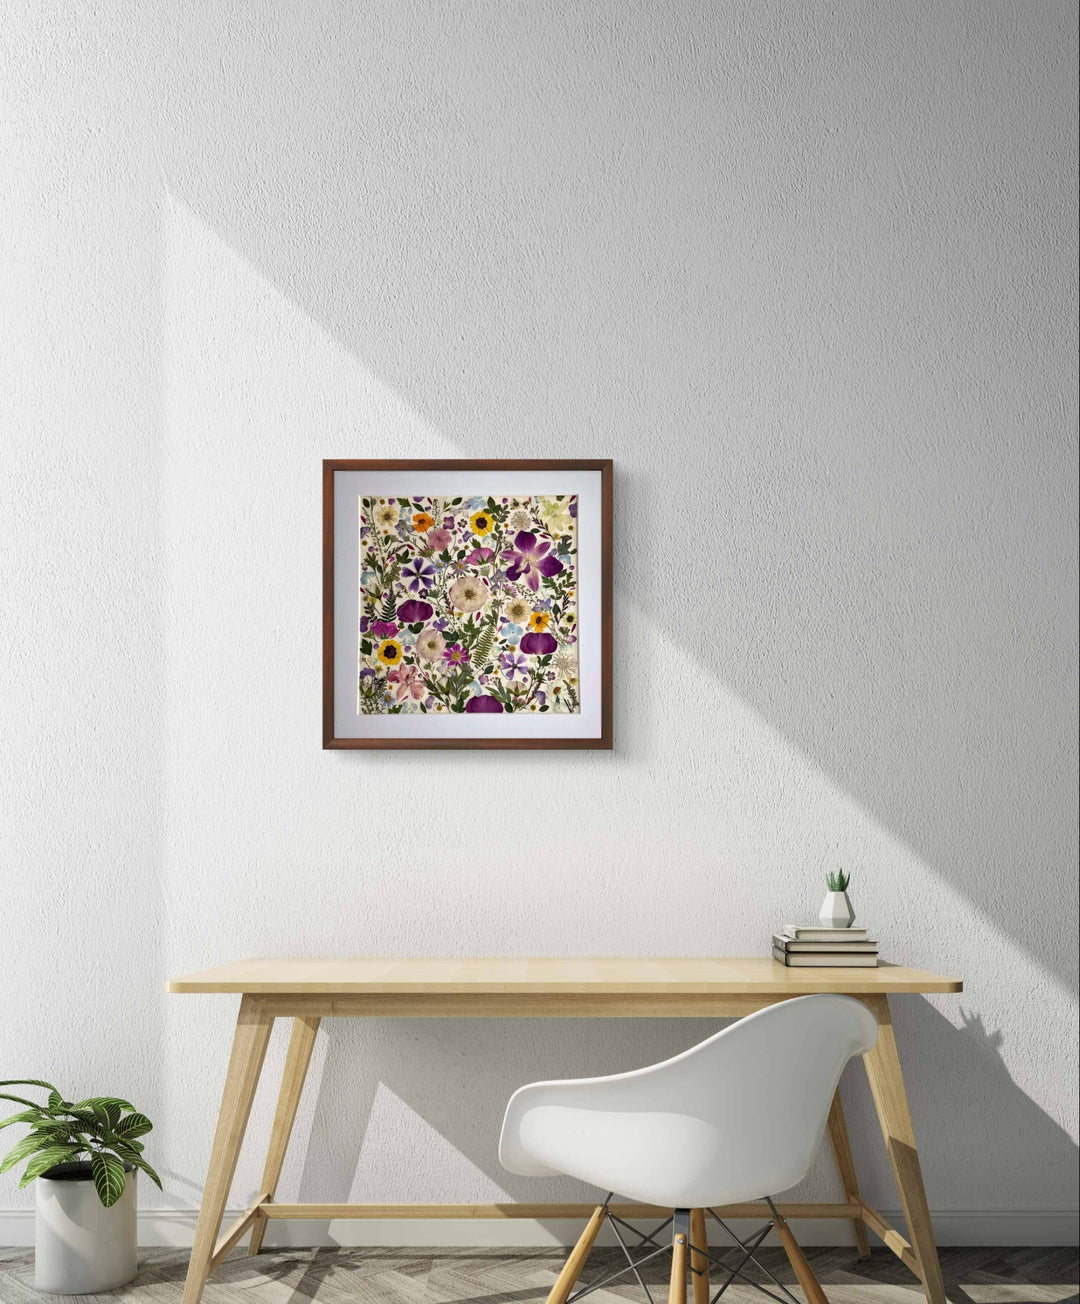 15.7 inch width 15.7 inch height pressed flower frame art that has vibrant and colorful petals formed design hanging on the wall.